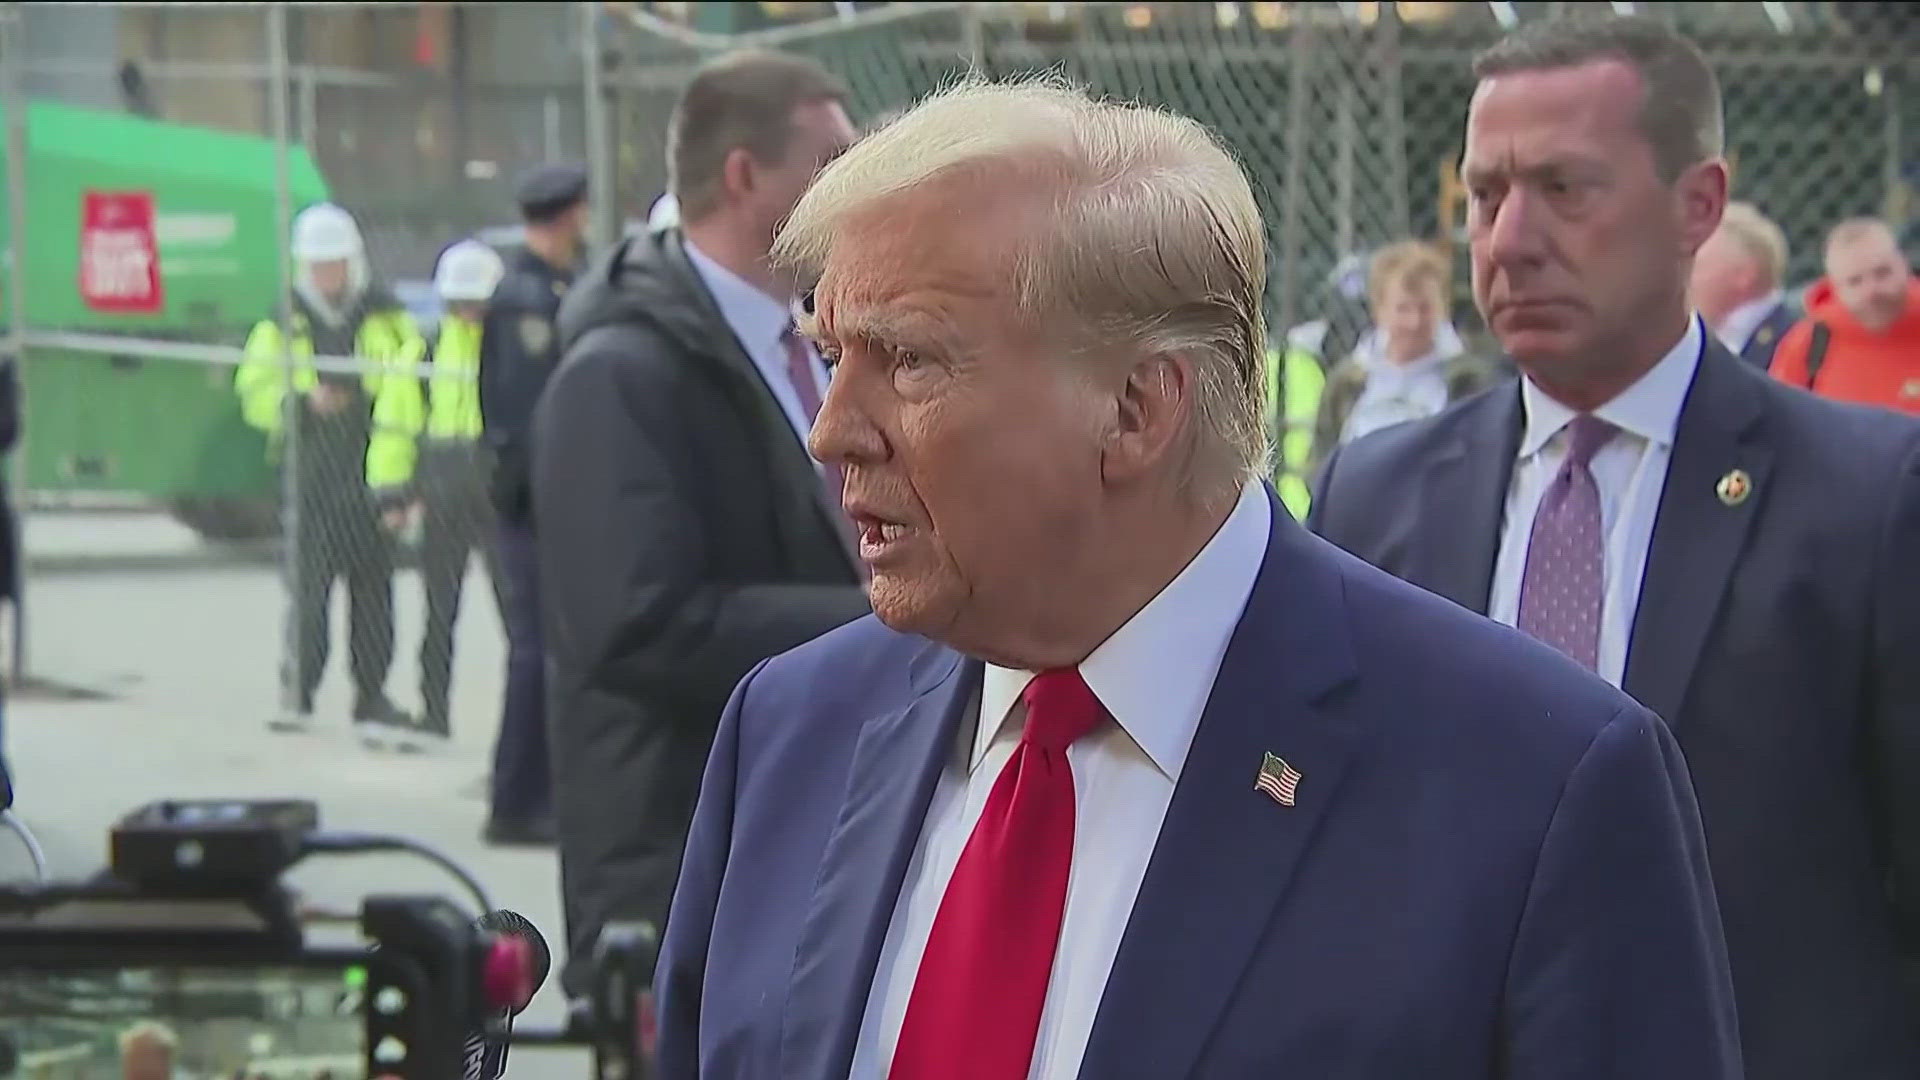 Donald Trump returned to a New York courtroom today, where he's charged with falsifying business records to cover up payments.